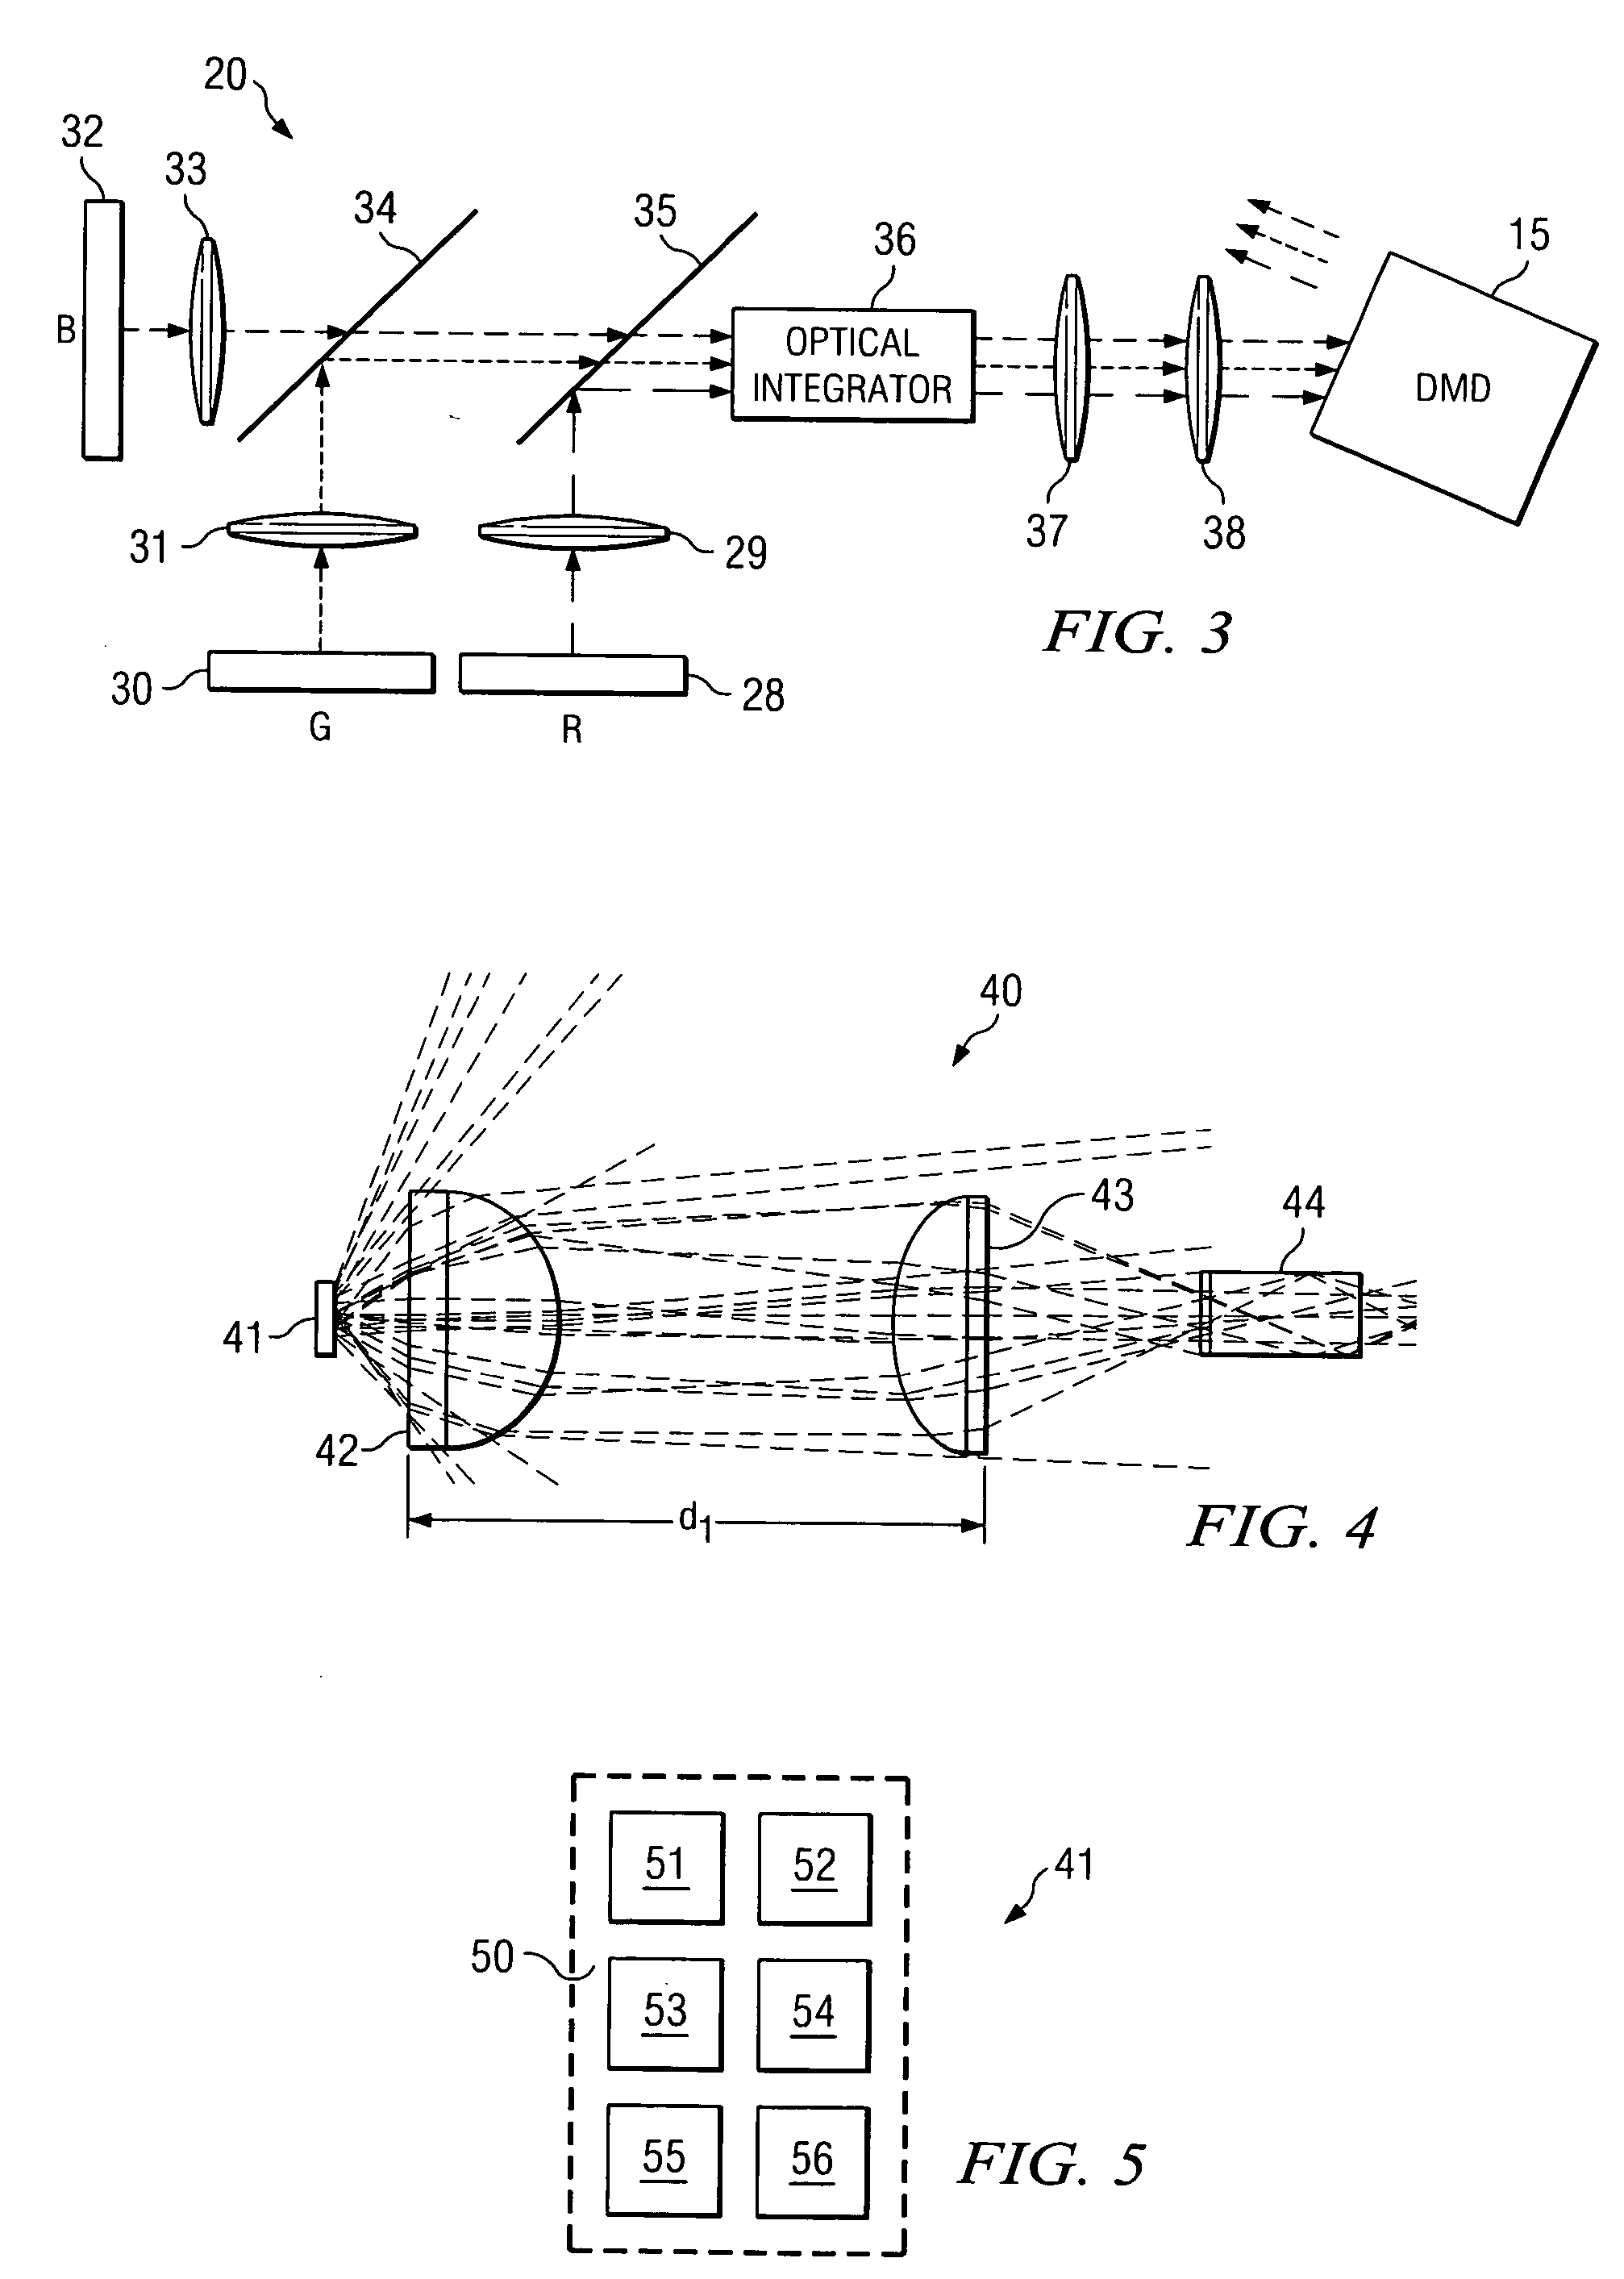 Method of combining dispersed light sources for projection display